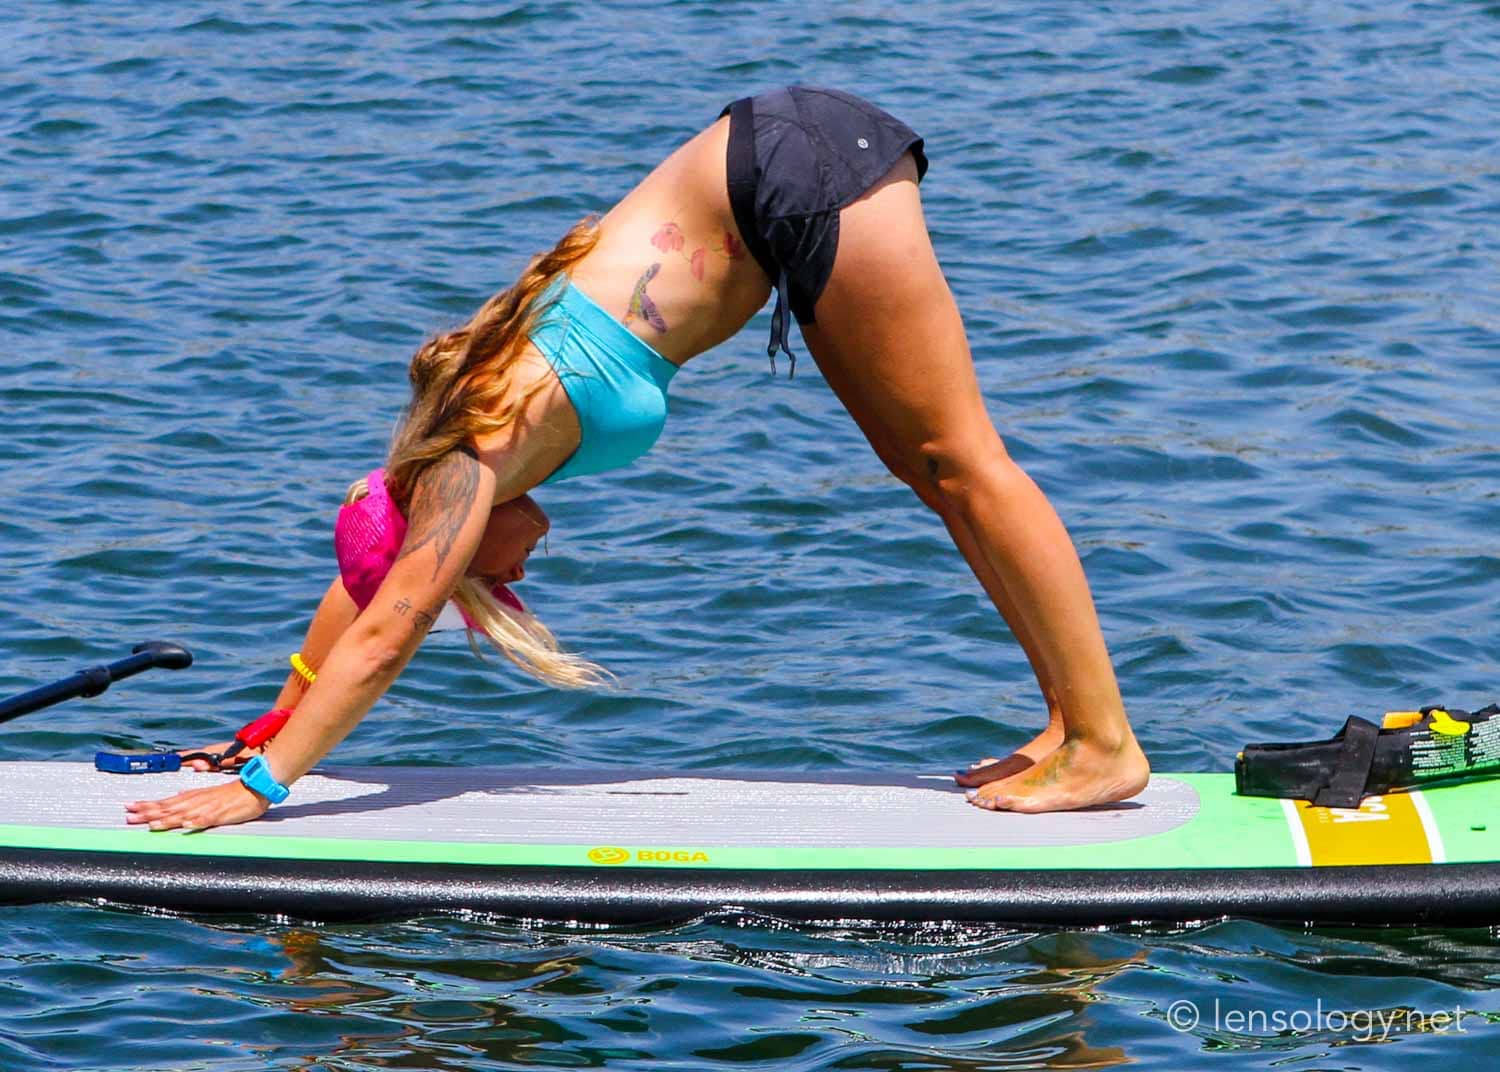 LENSOLOGY.NET - YOGAqua promo shoot. YOGAqua brings yoga into fusion with stand up paddle boarding, LA, CA.
All images are copyright of Lensology.net
Email: info@lensology.net
www.lensology.net